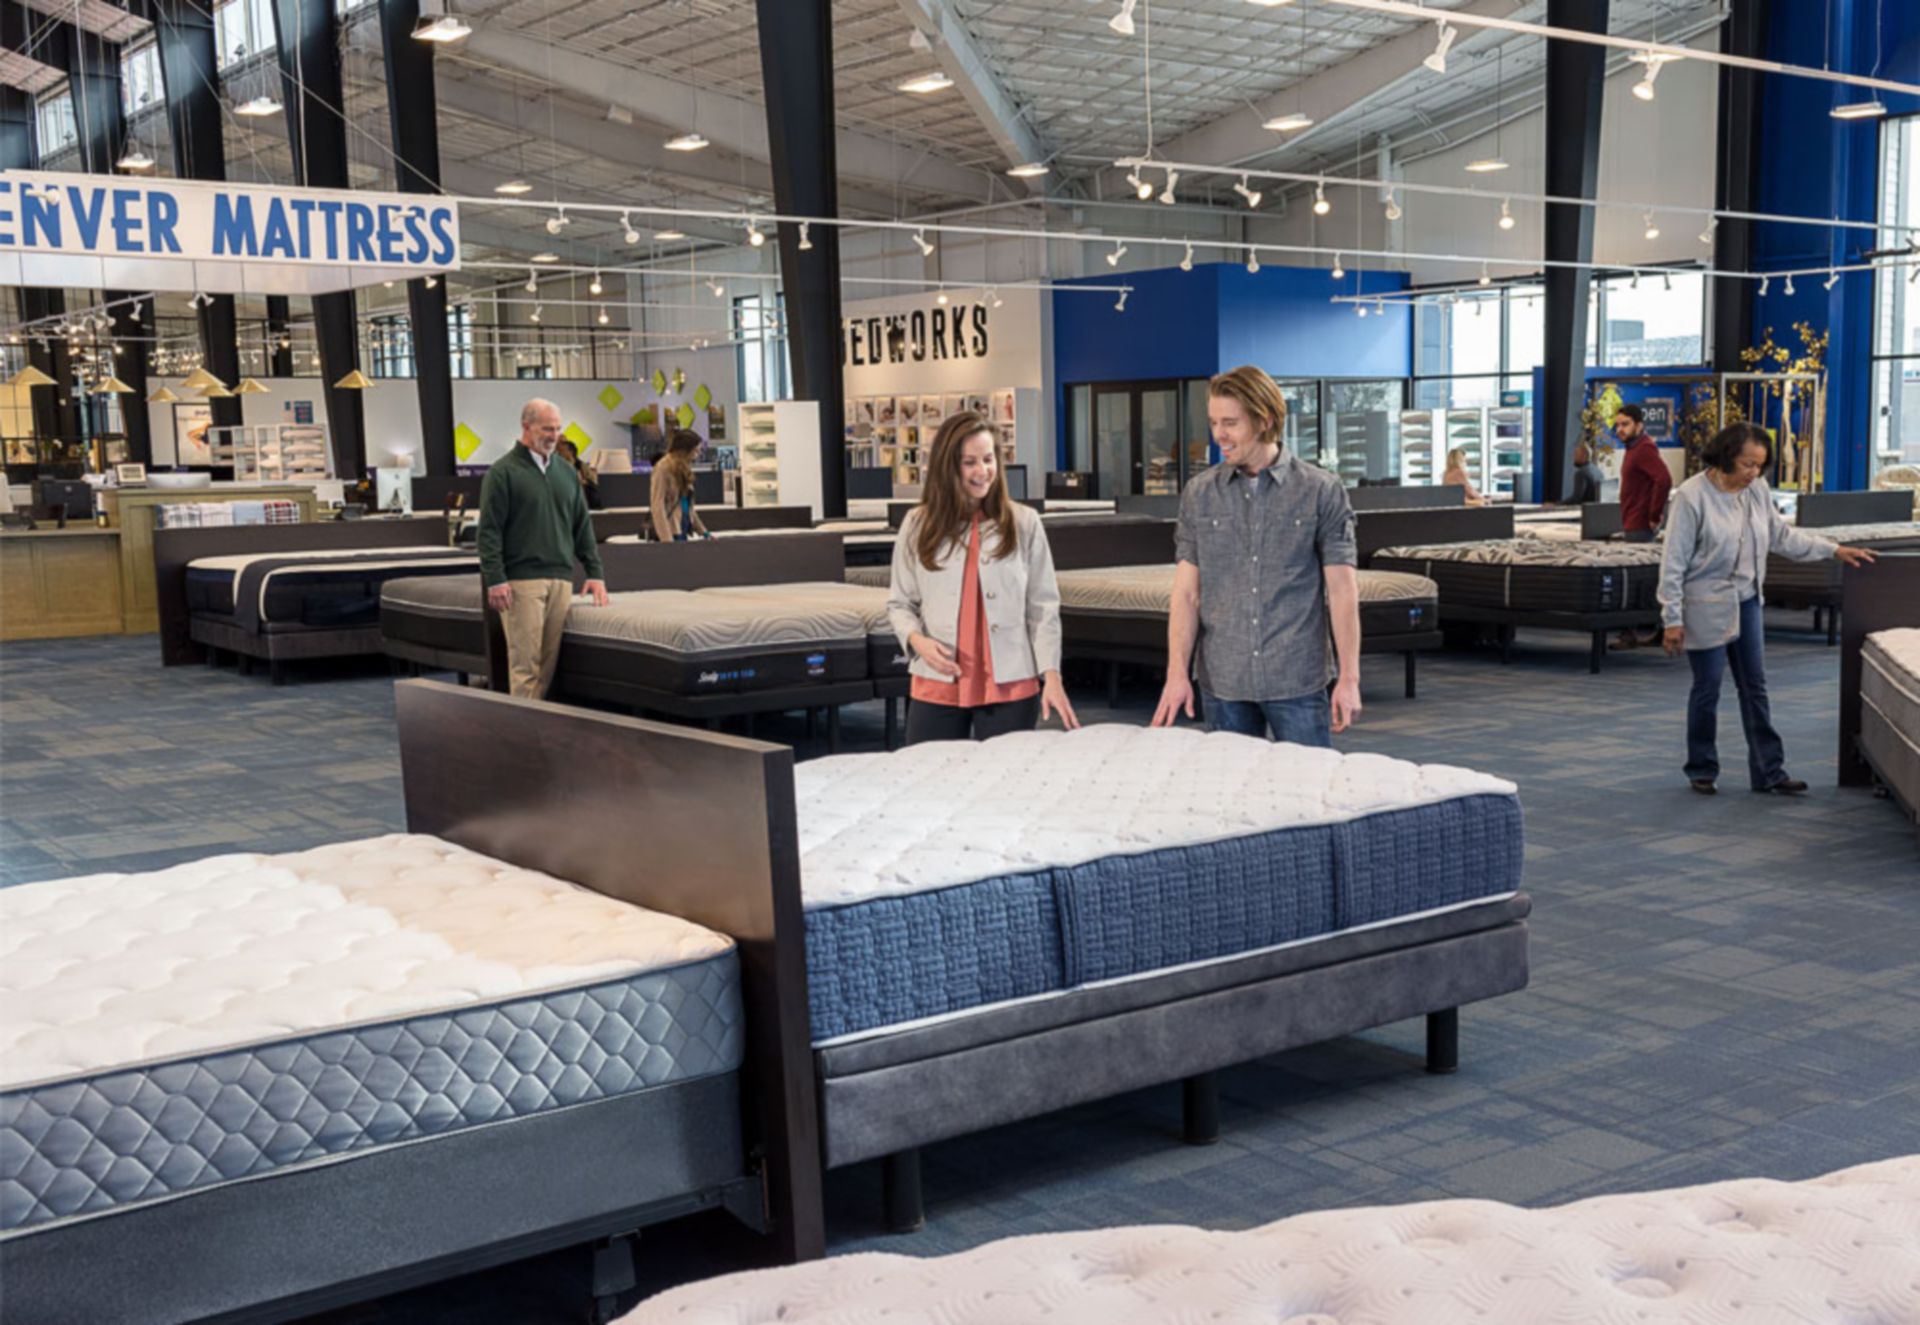 Doctor's Choice Mattress with customers in Denver Mattress Store.